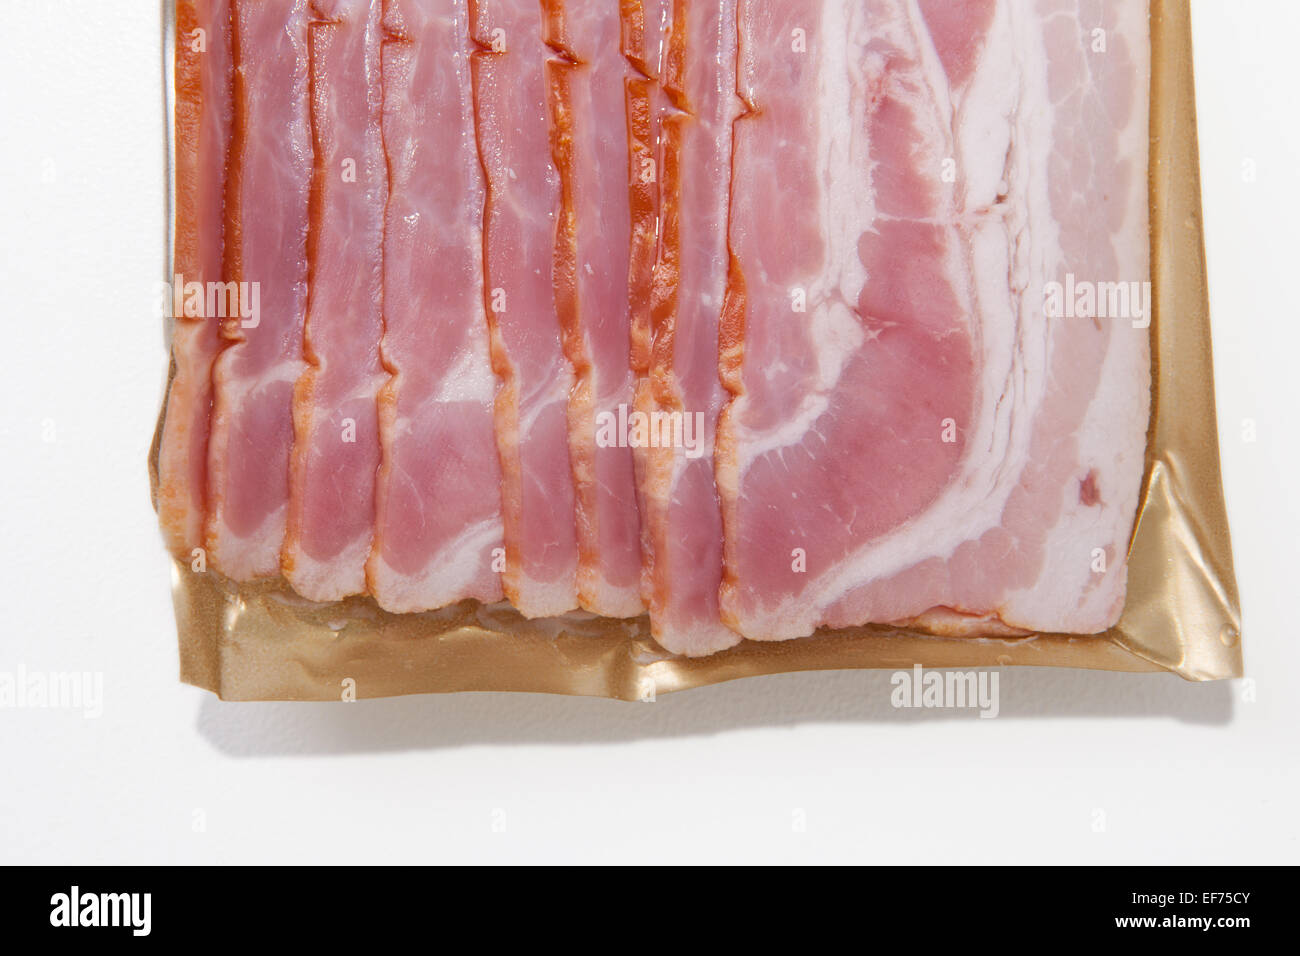 https://c8.alamy.com/comp/EF75CY/bacon-slices-on-the-package-isolated-on-white-background-EF75CY.jpg